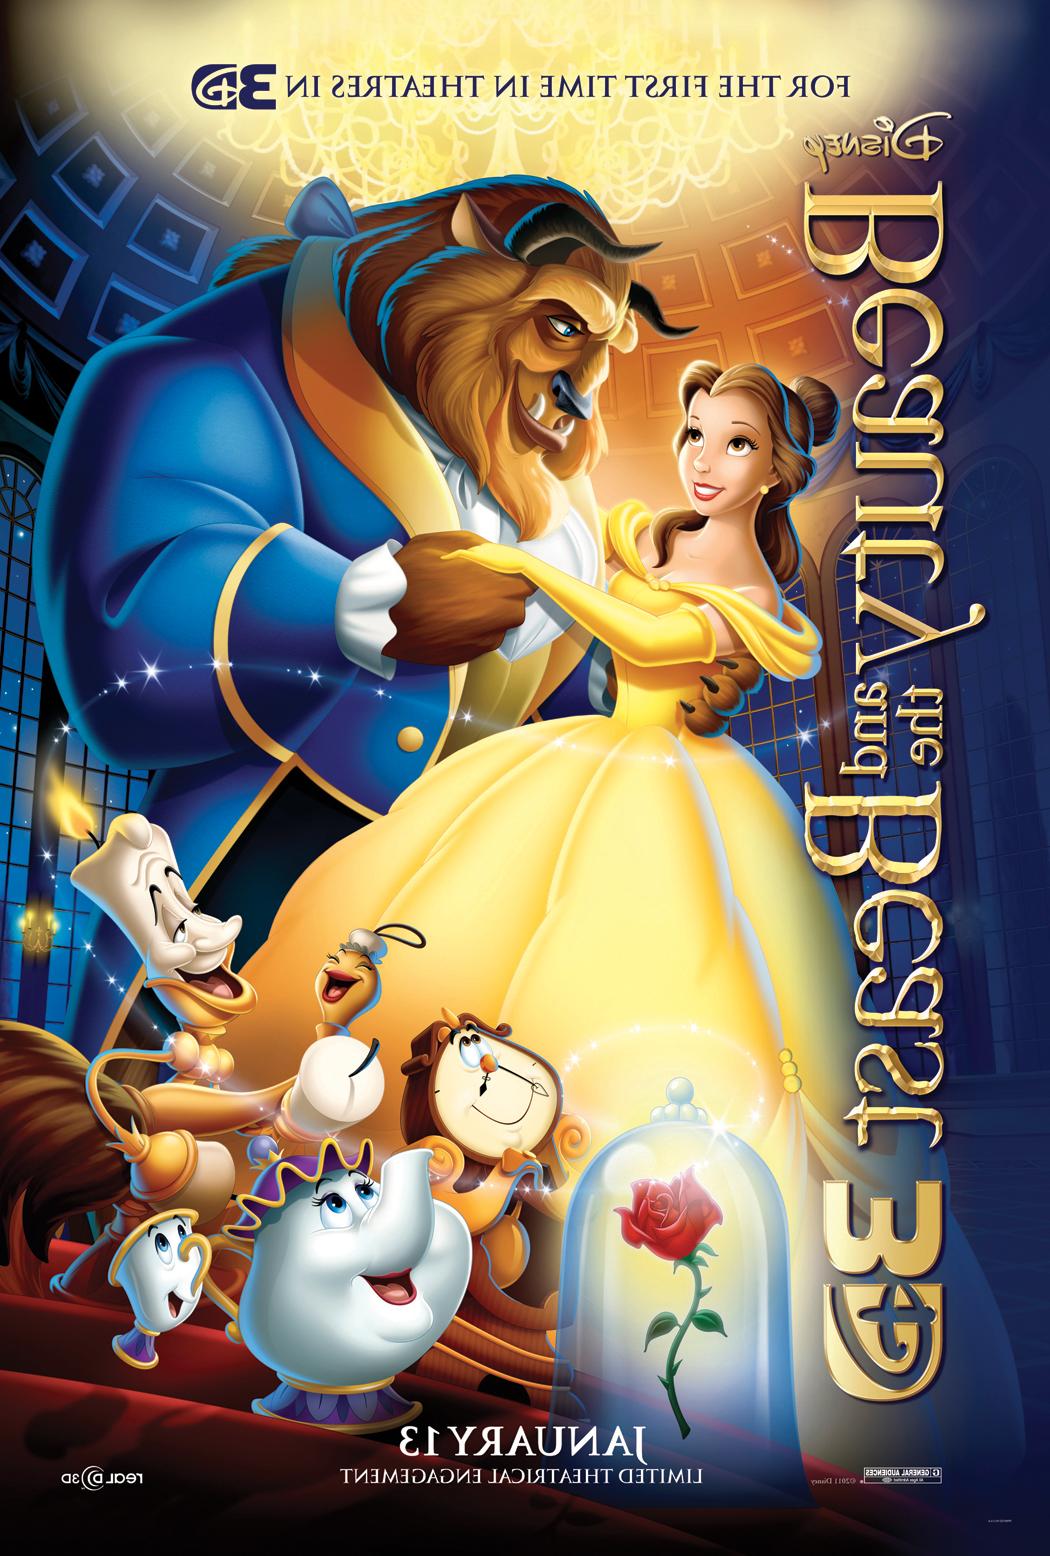 Beauty and the Beast is